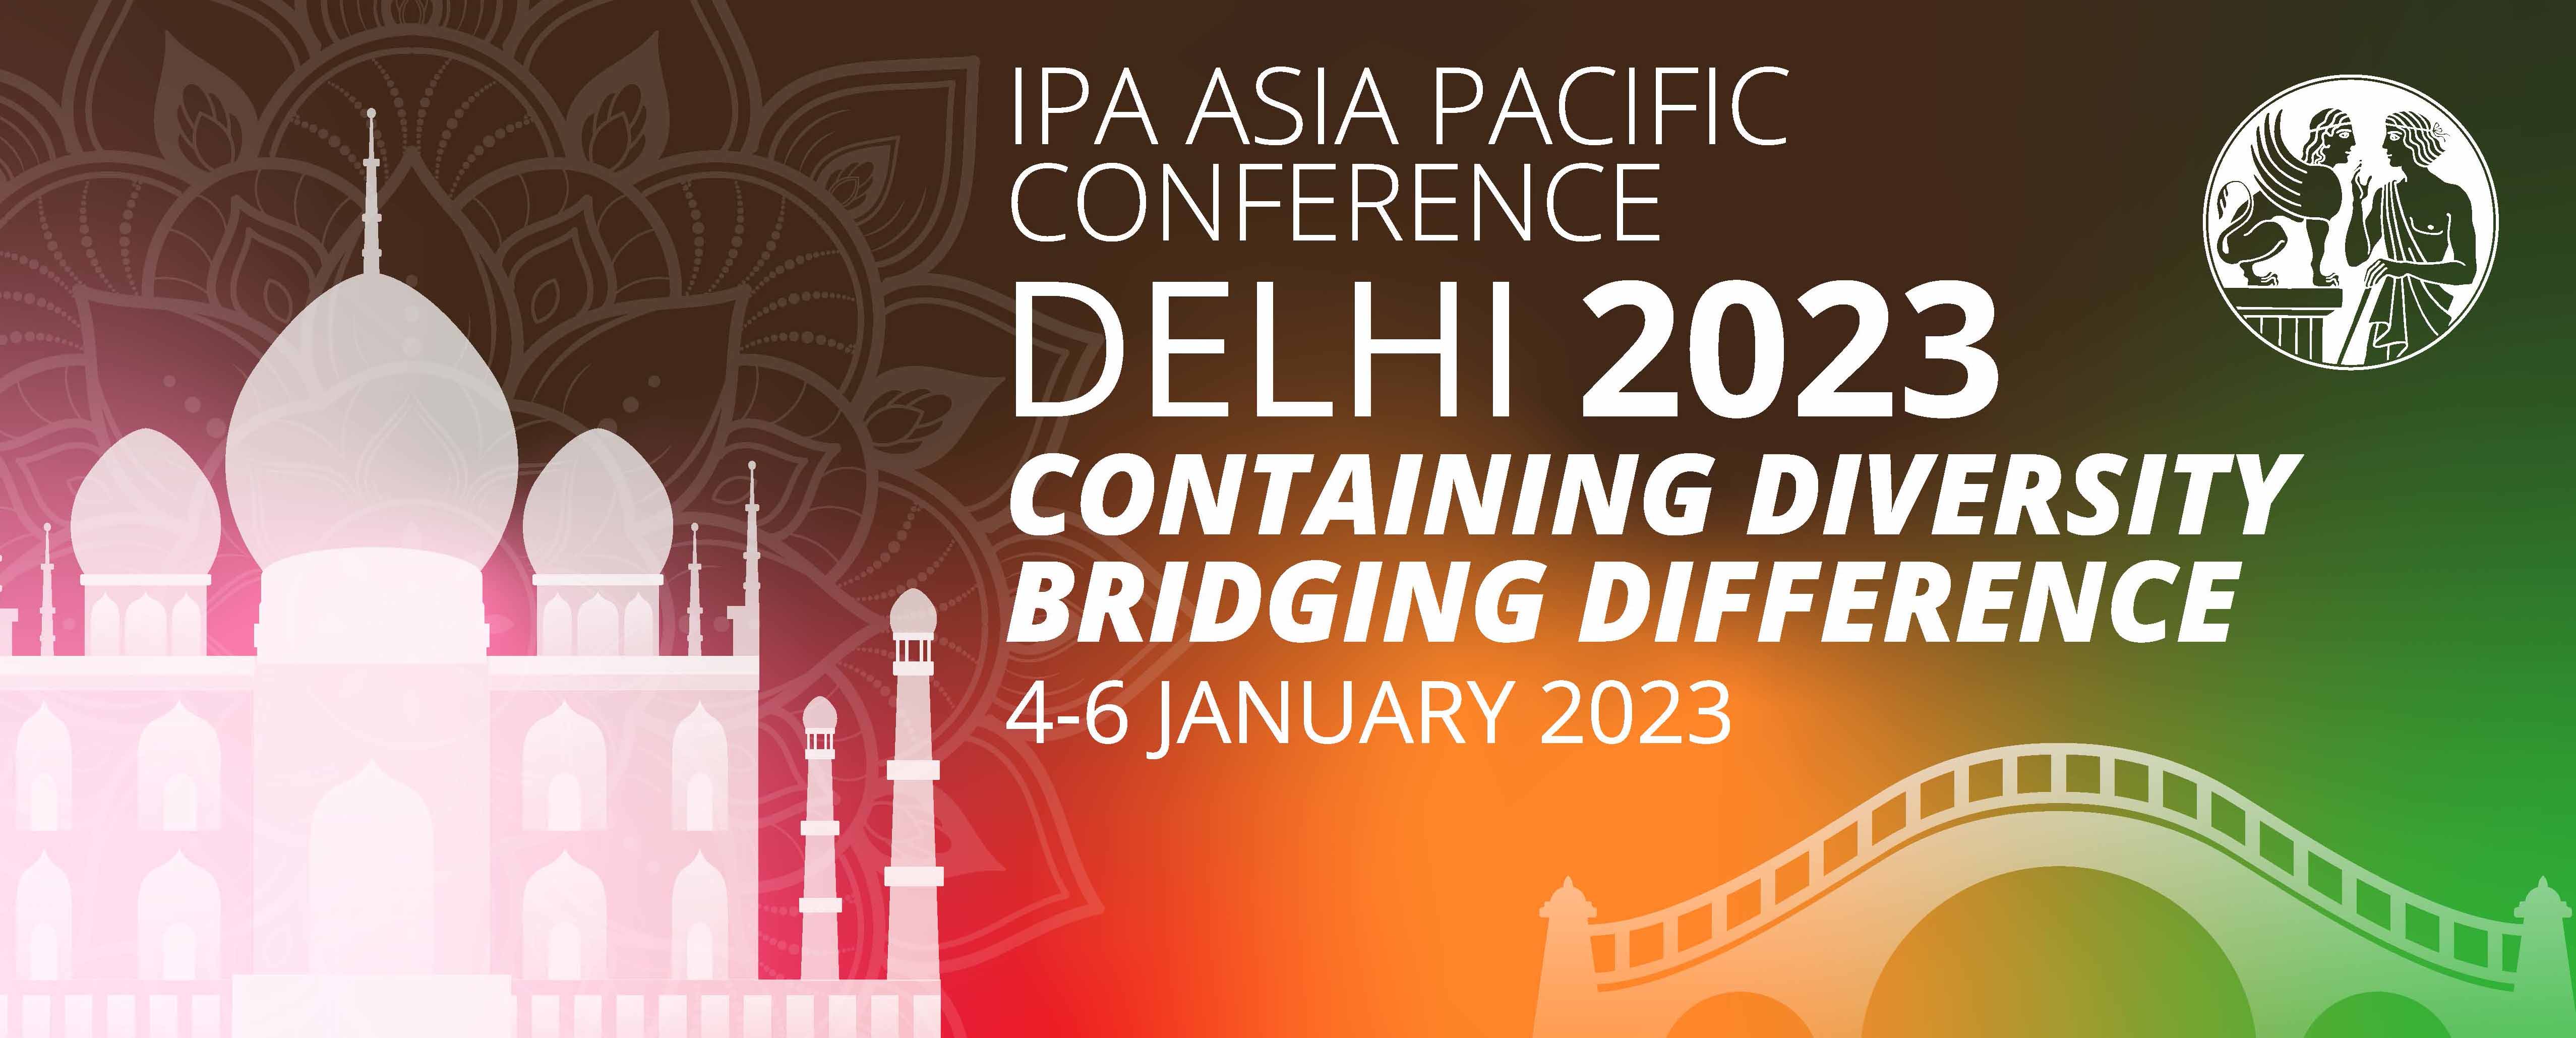 IPA Asia-Pacific Conference 2023